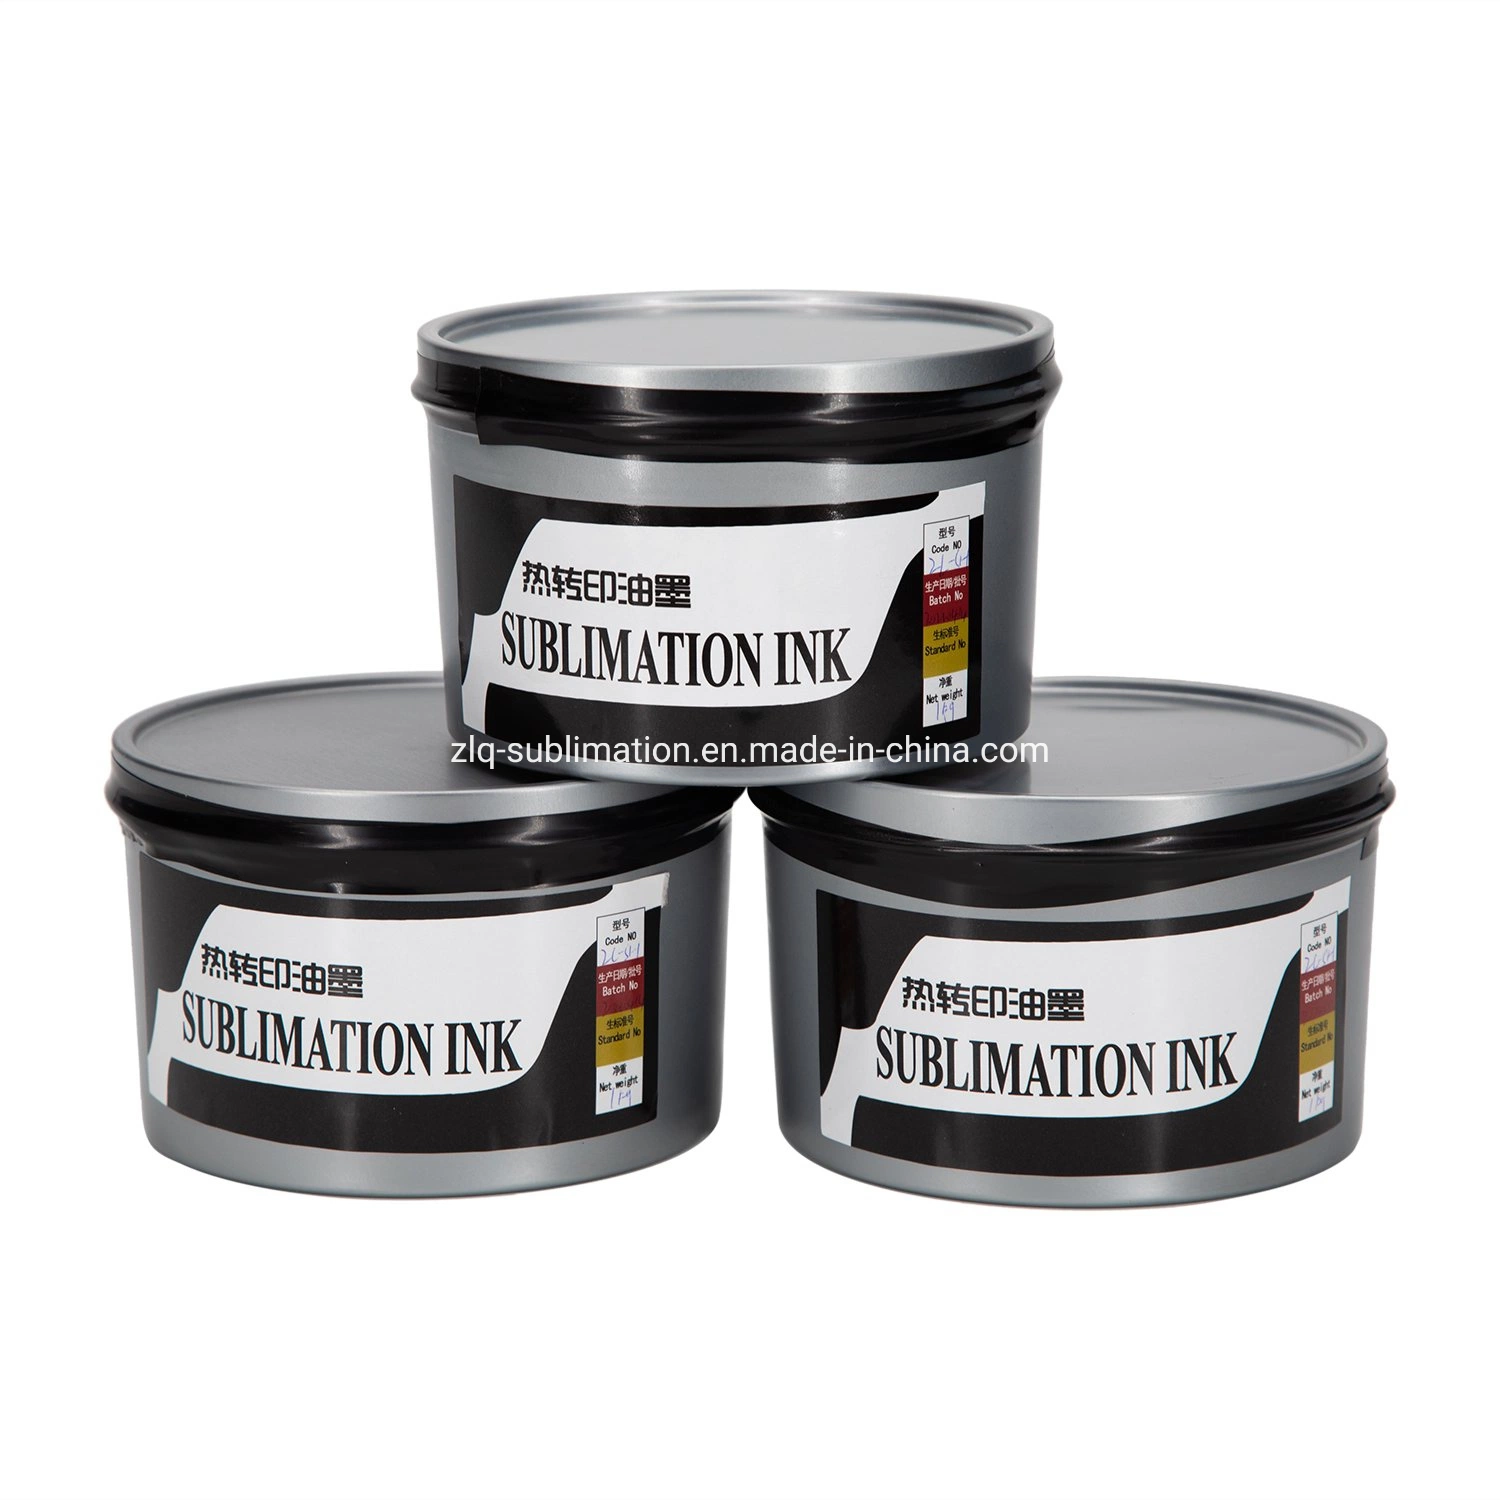 Sublimation Ink for Offset Printing About Heat Transfer Ink